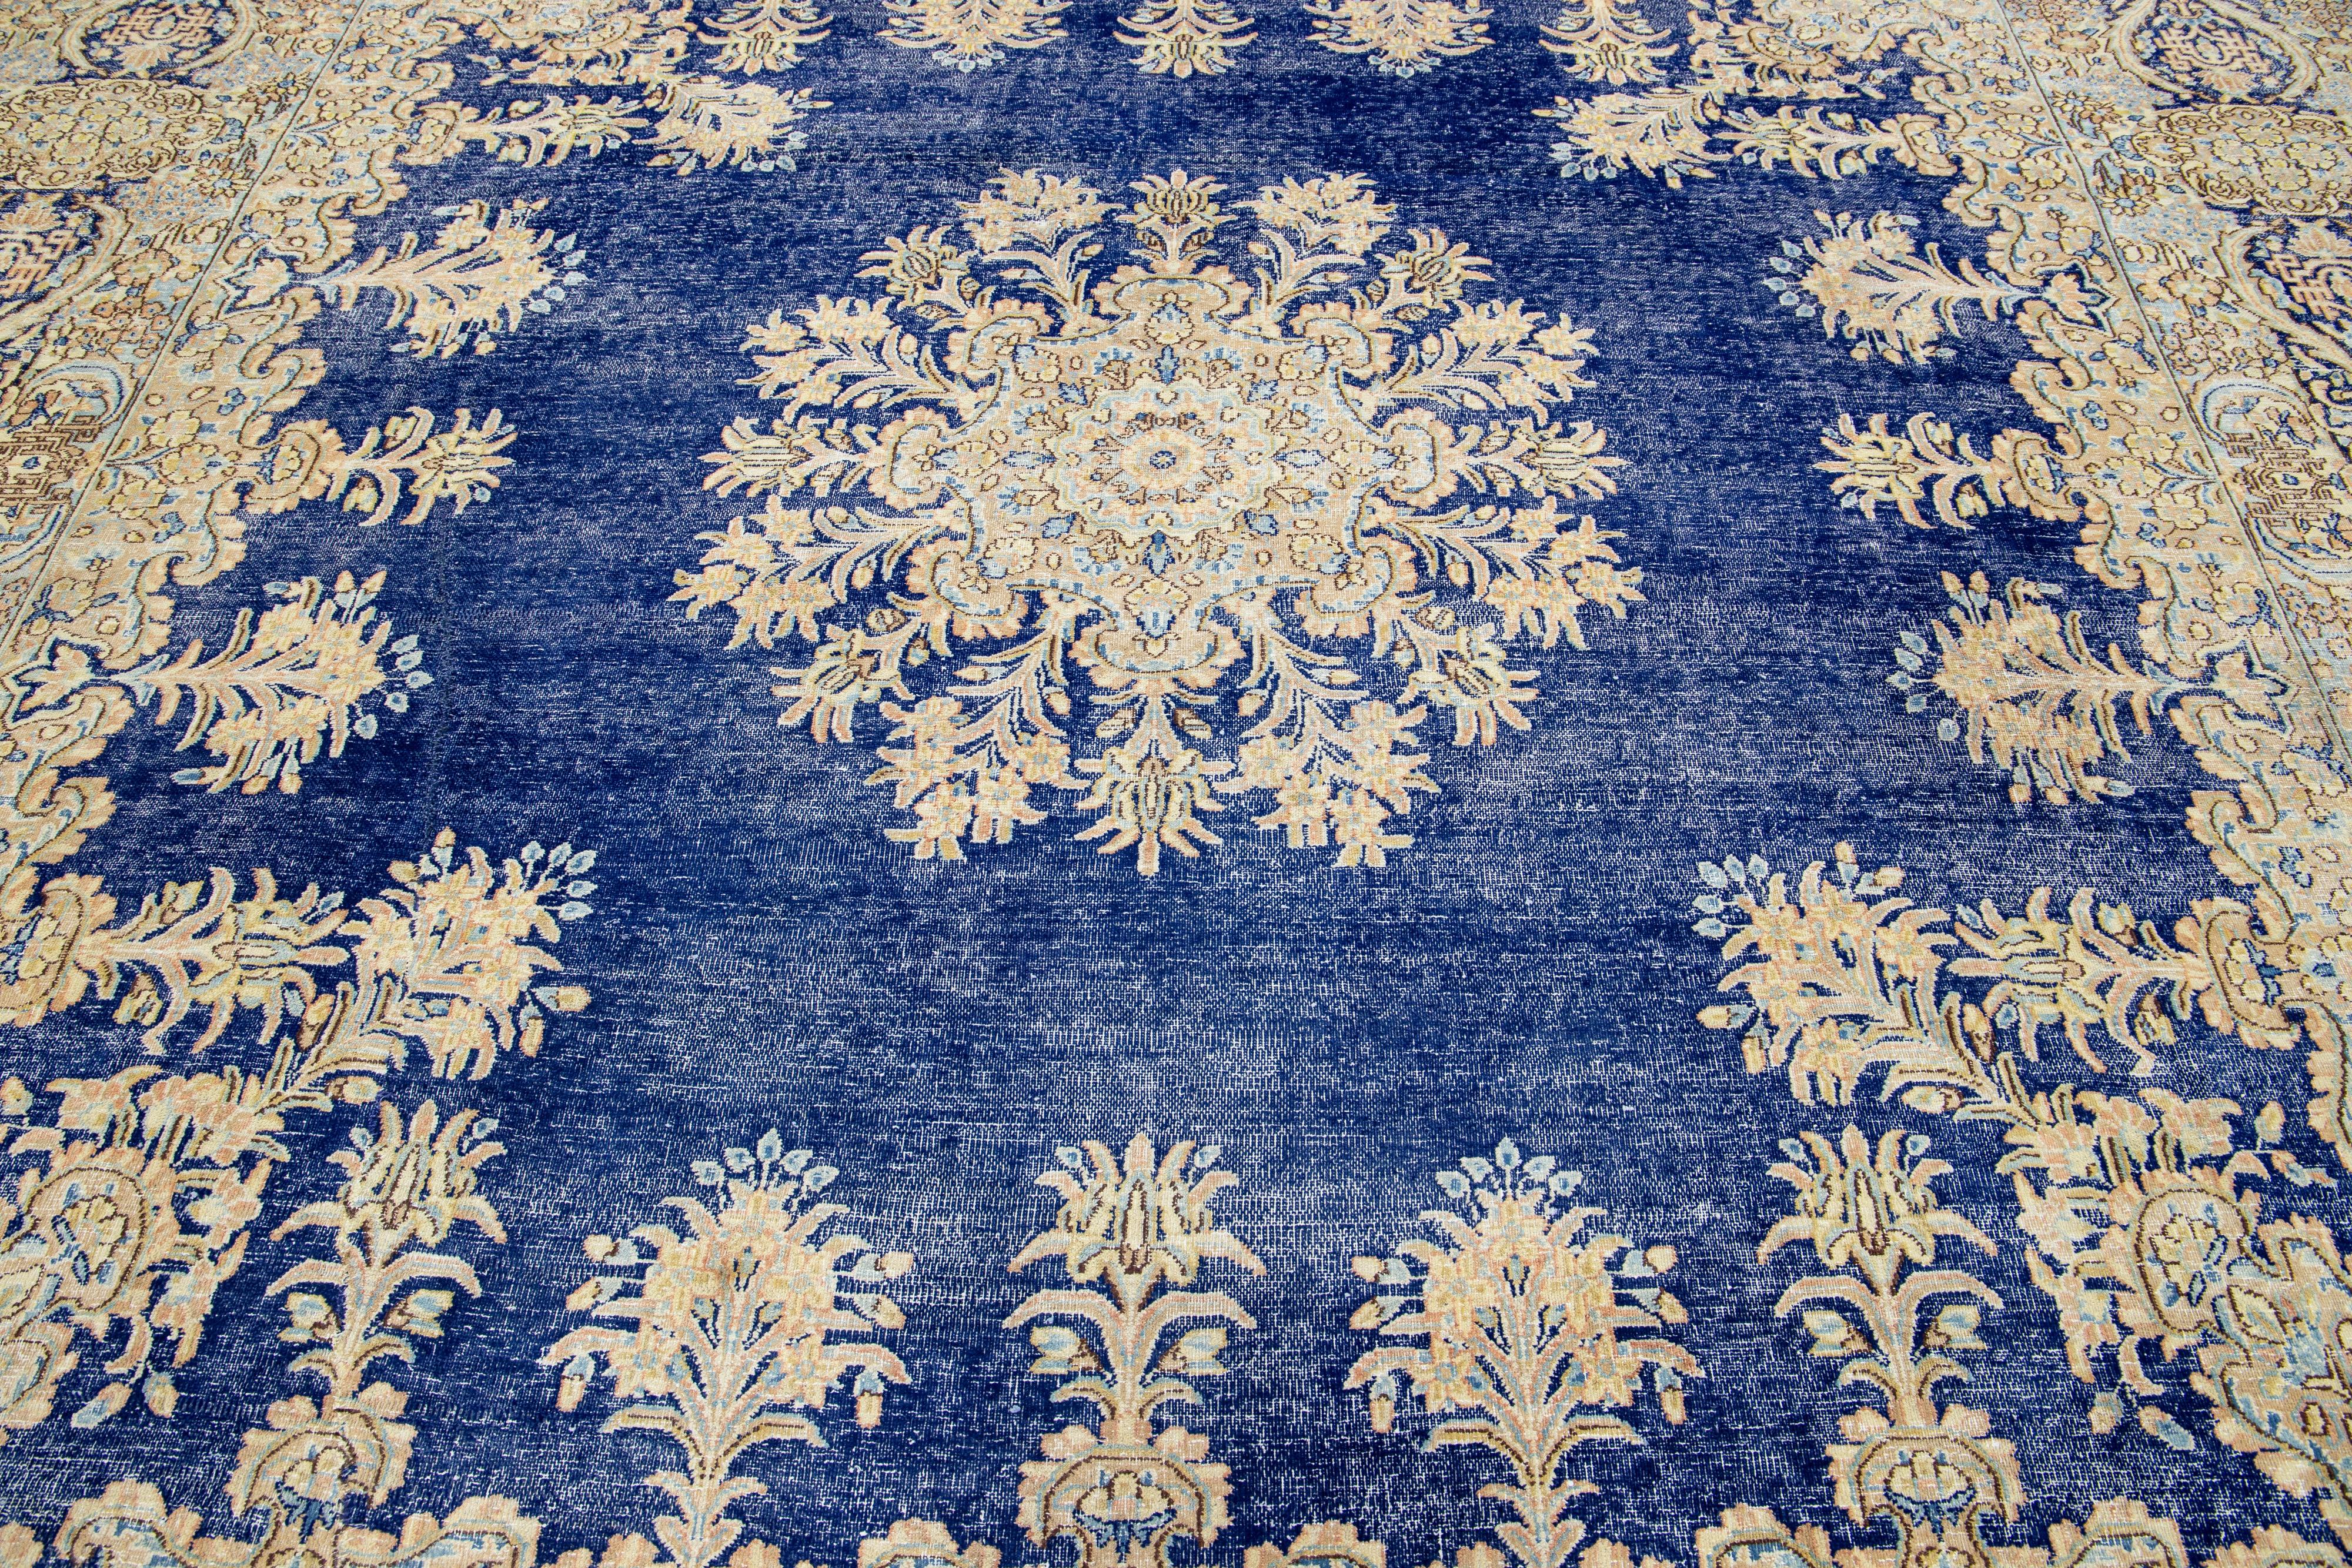 Blue Antique Persian Kerman Square  Wool Rug Handmade Featuring a Rosette Motif  For Sale 2